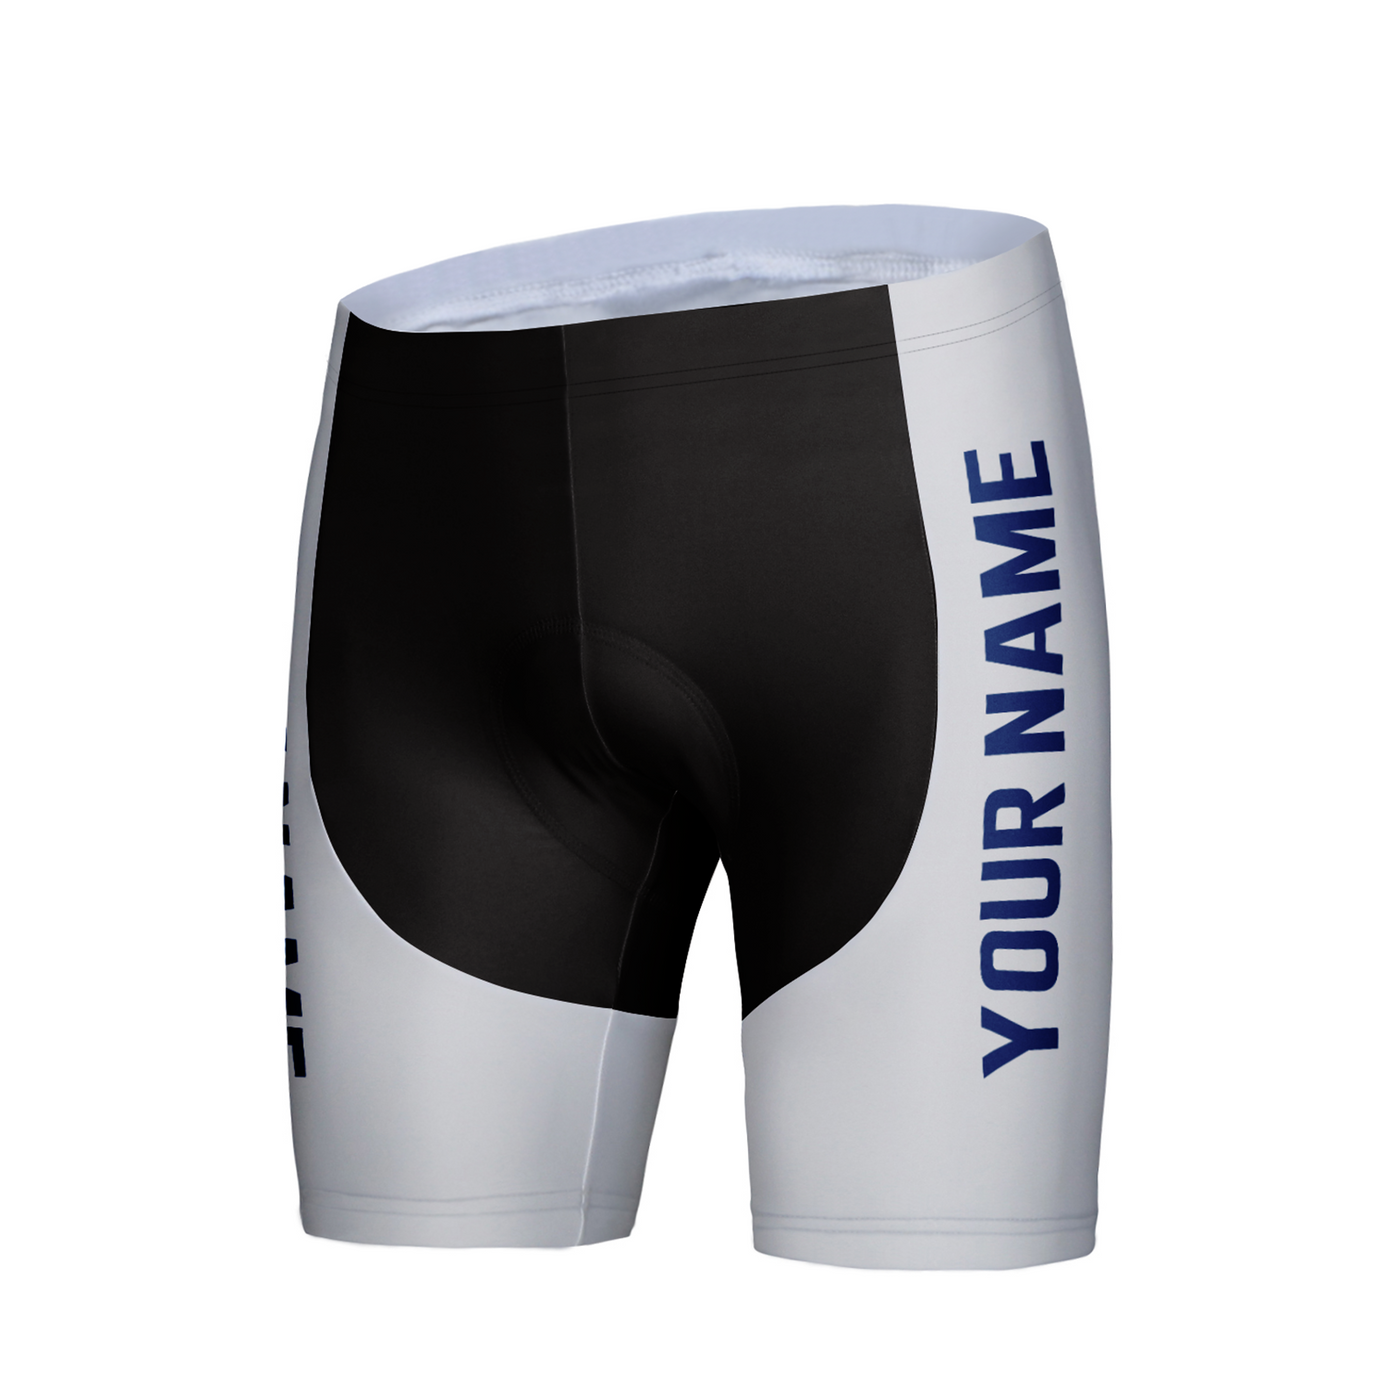 Customized Los Angeles Team Unisex Cycling Shorts